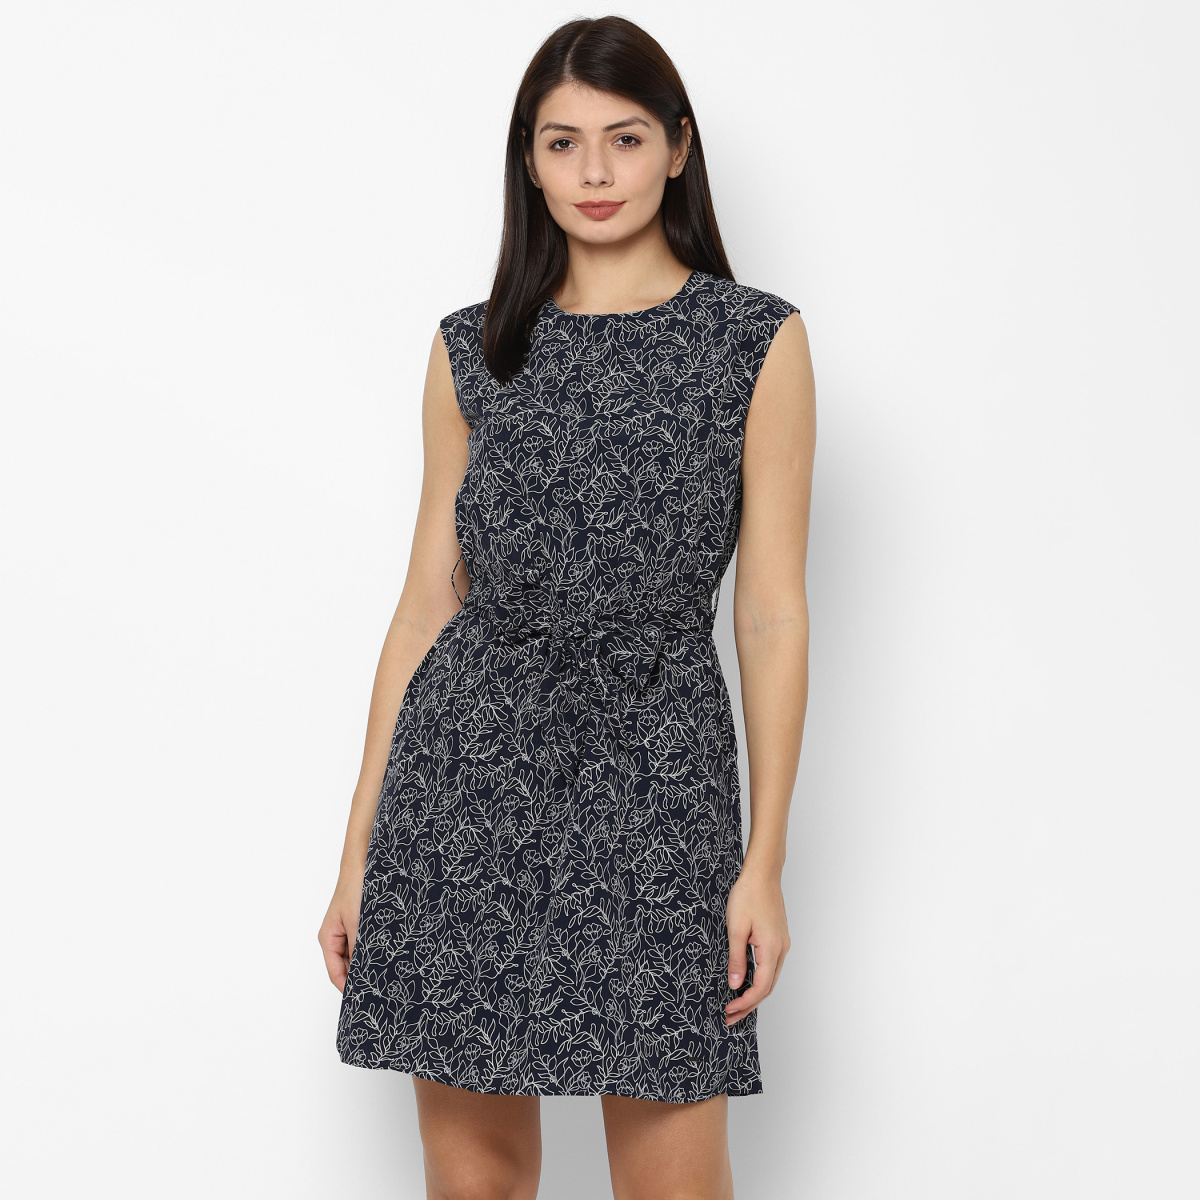 Allen Solly Woman Casual Dresses, for Women at Allensolly.com